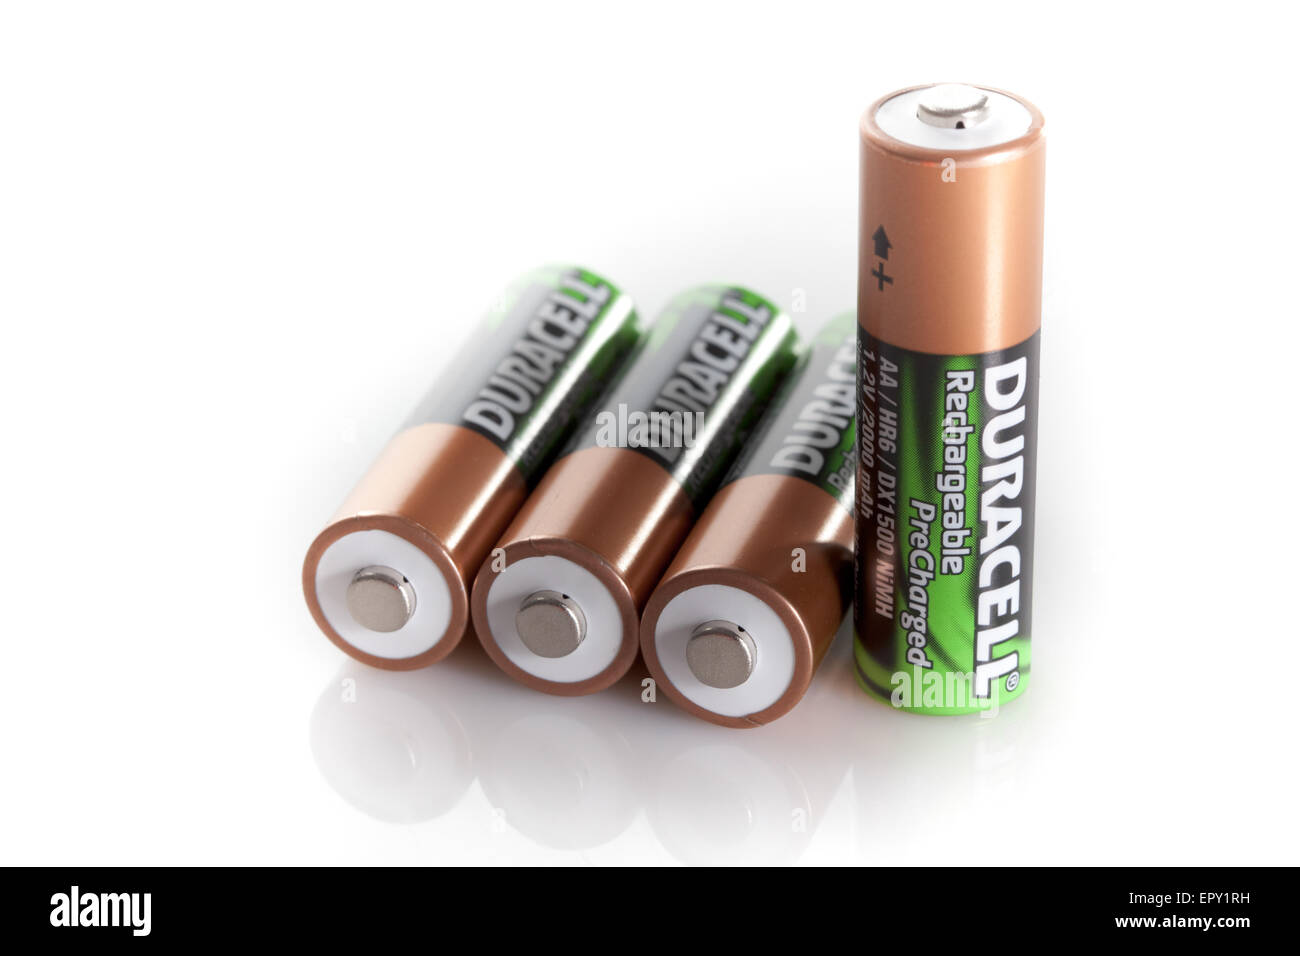 Duracell rechargeable battery  isolated on a white background Stock Photo